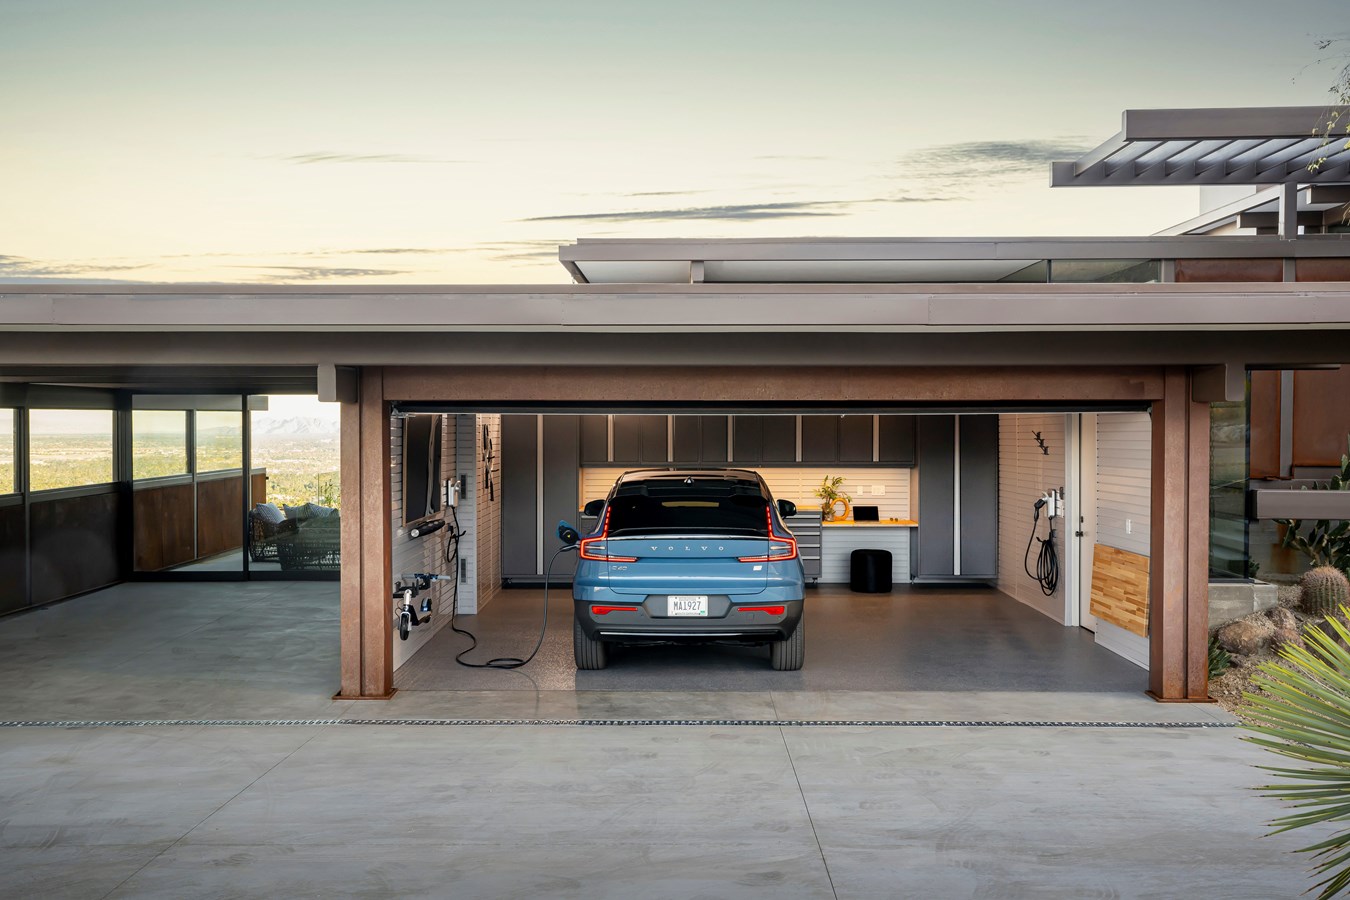 Volvo Car USA Showcases the All-Electric C40 Recharge in the “Recharge  Garage” Designed in Partnership with Garage Living and Compass - Volvo Car  USA Newsroom